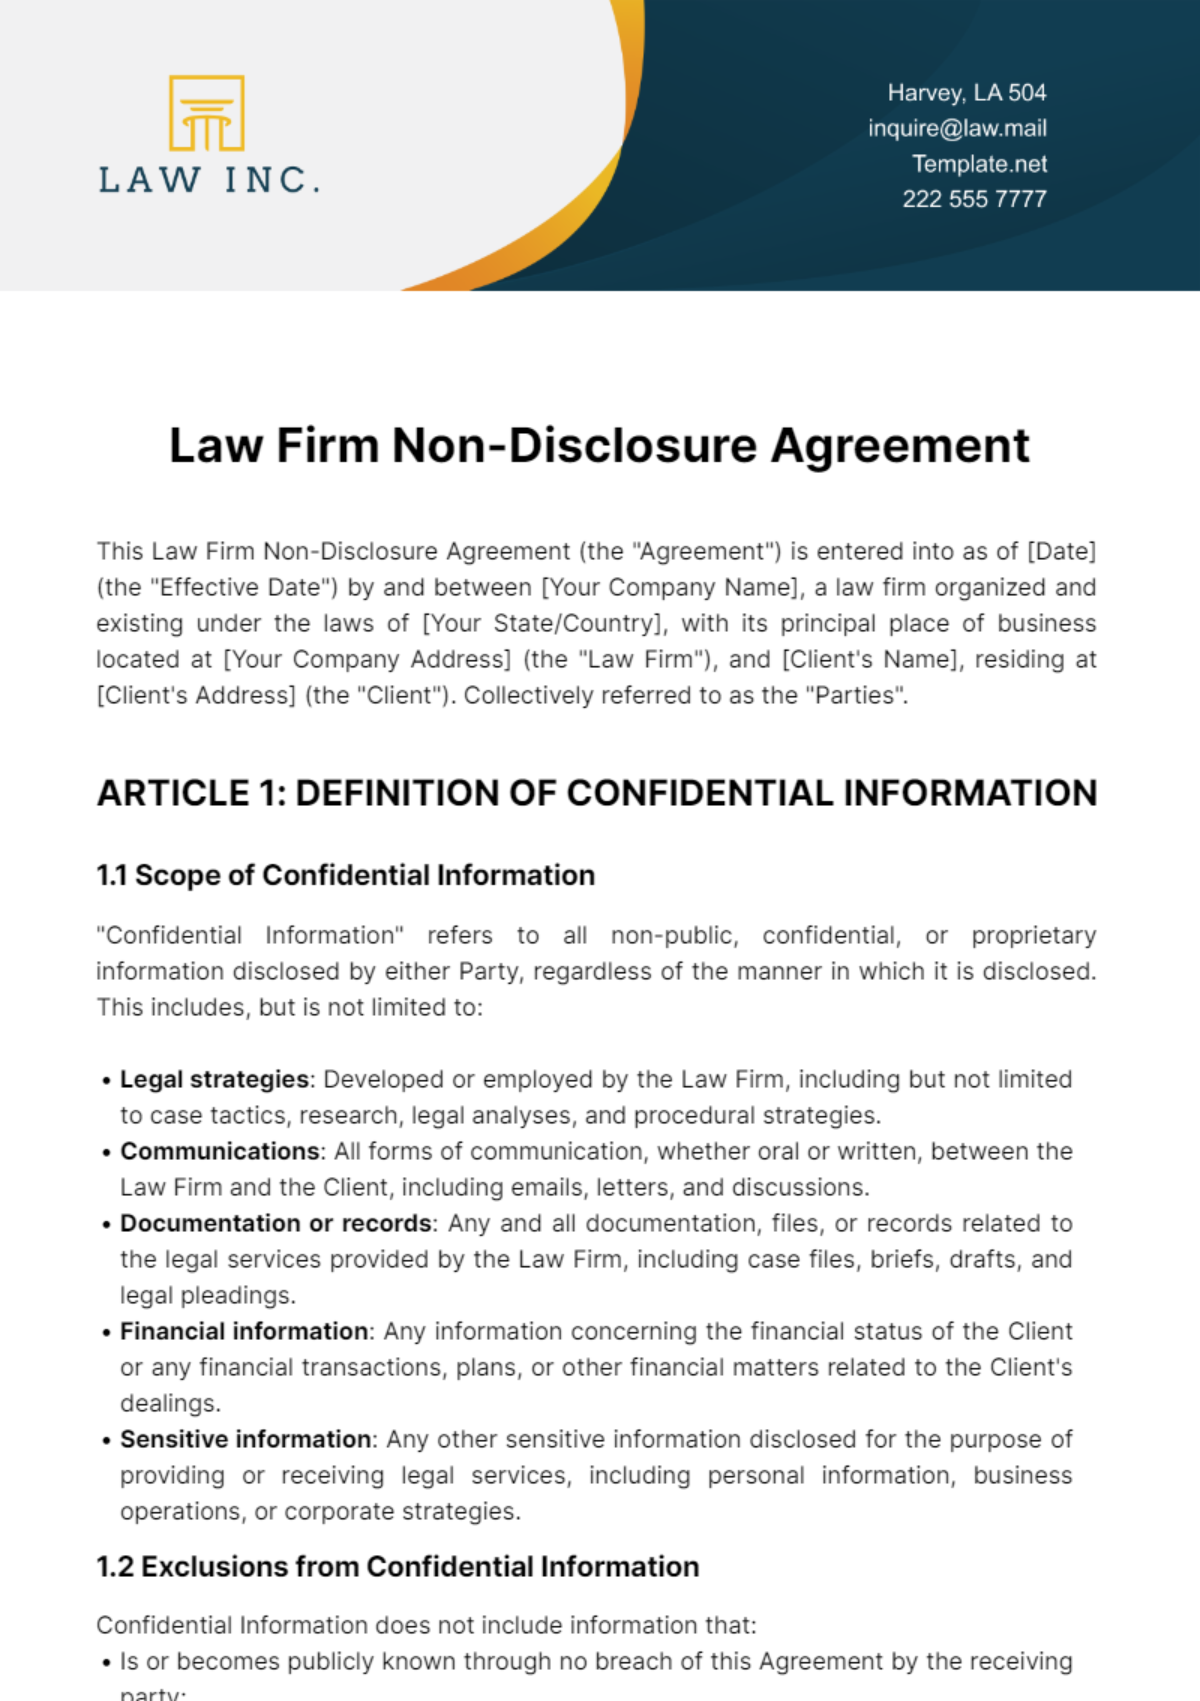 Free Law Firm Non-Disclosure Agreement Template